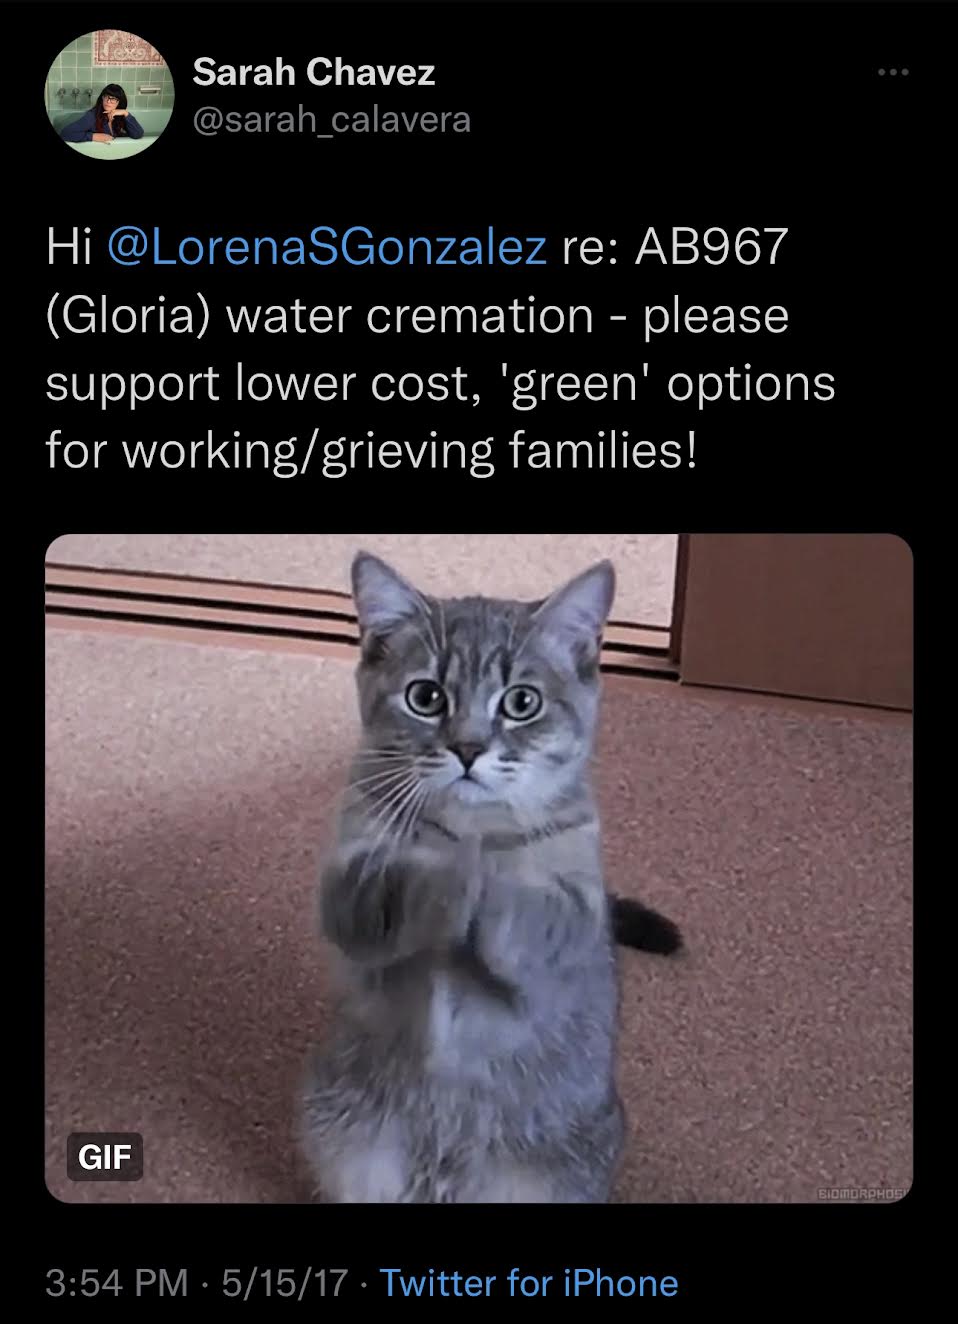 Tweet from Sarah Chavez @LorenaGonzalez re:AB967 (Gloria) water cremation- please support lower cost, ‘green’ options for working/grieving families.” With attached .gif where a grey kitten that appears to be holding its paws up in prayer